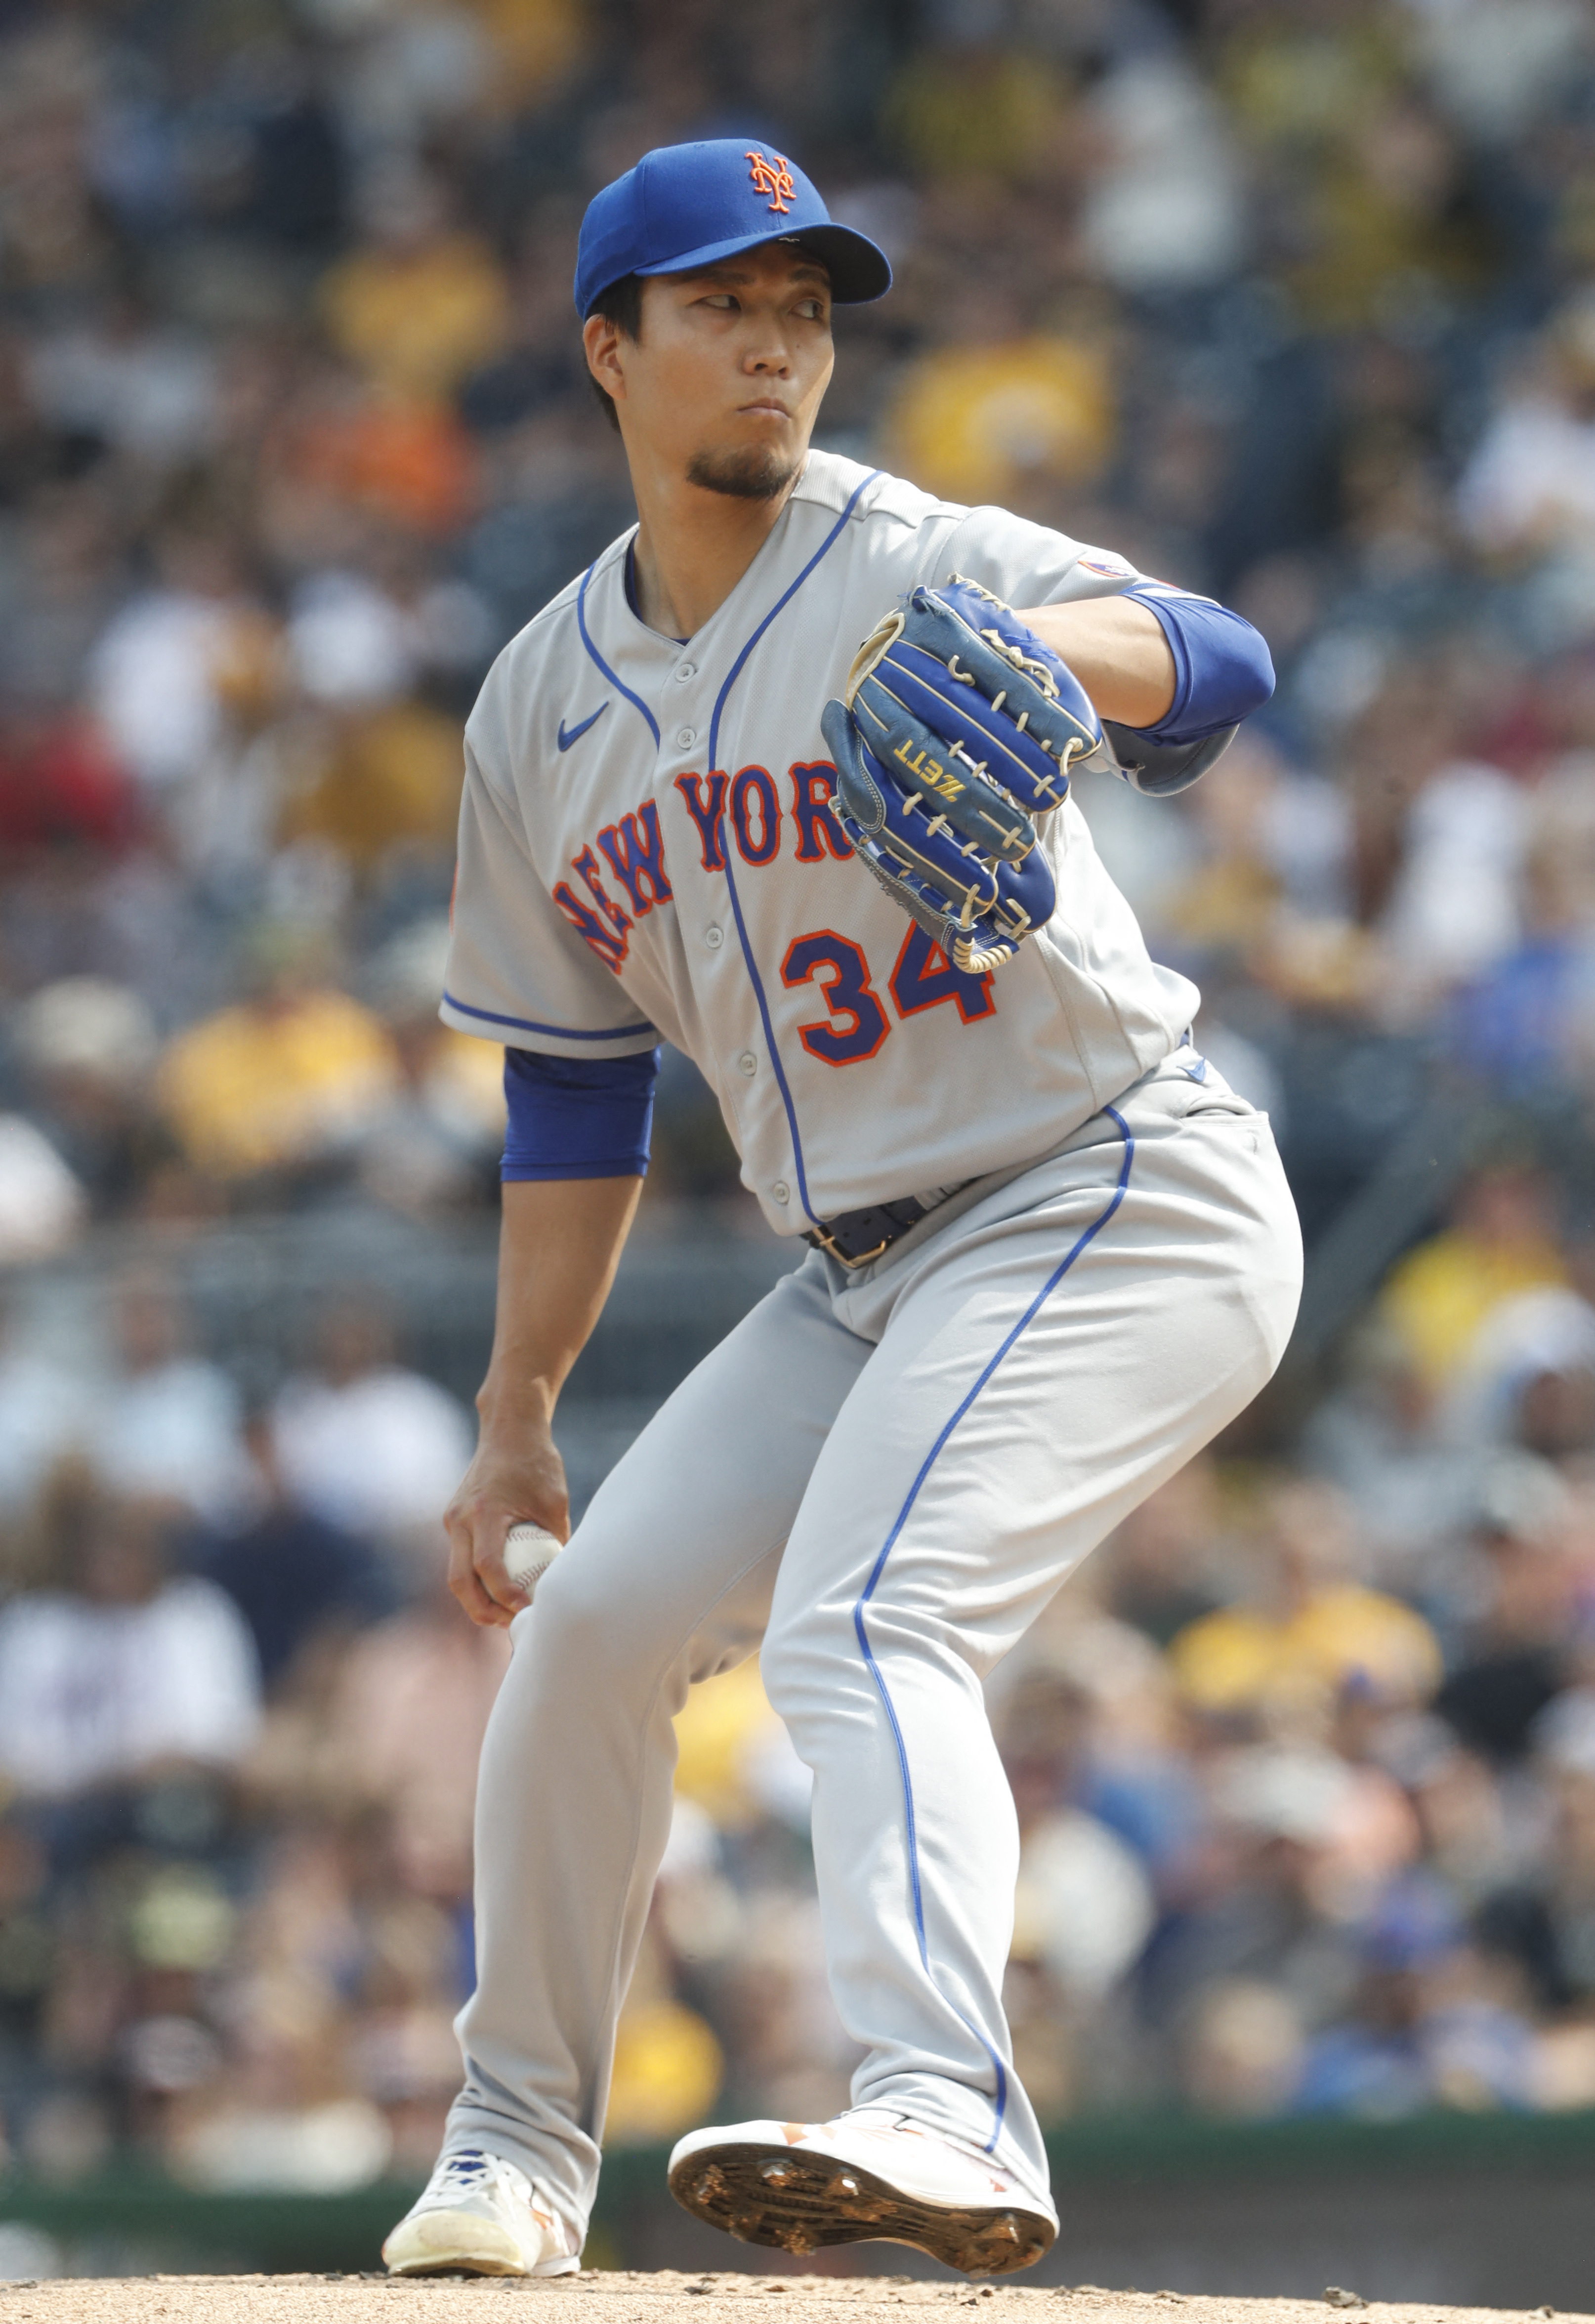 Mark Canha helps Mets beat Pirates, snap 7-game skid